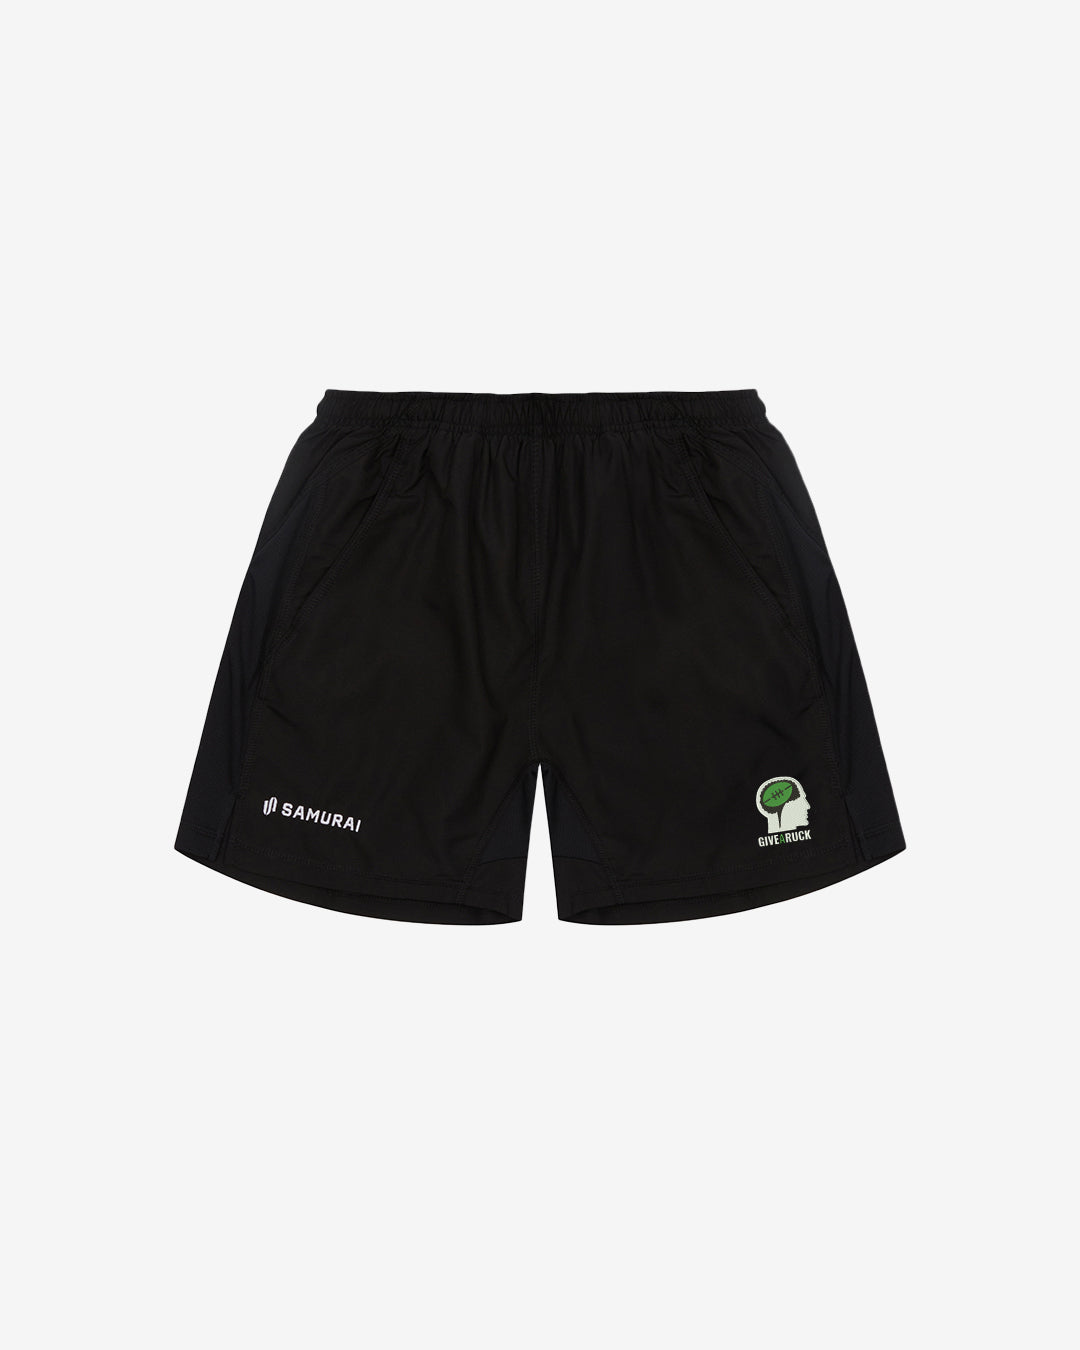 Give A Ruck - EP:0100 - Clipper Short 2.0 - Black